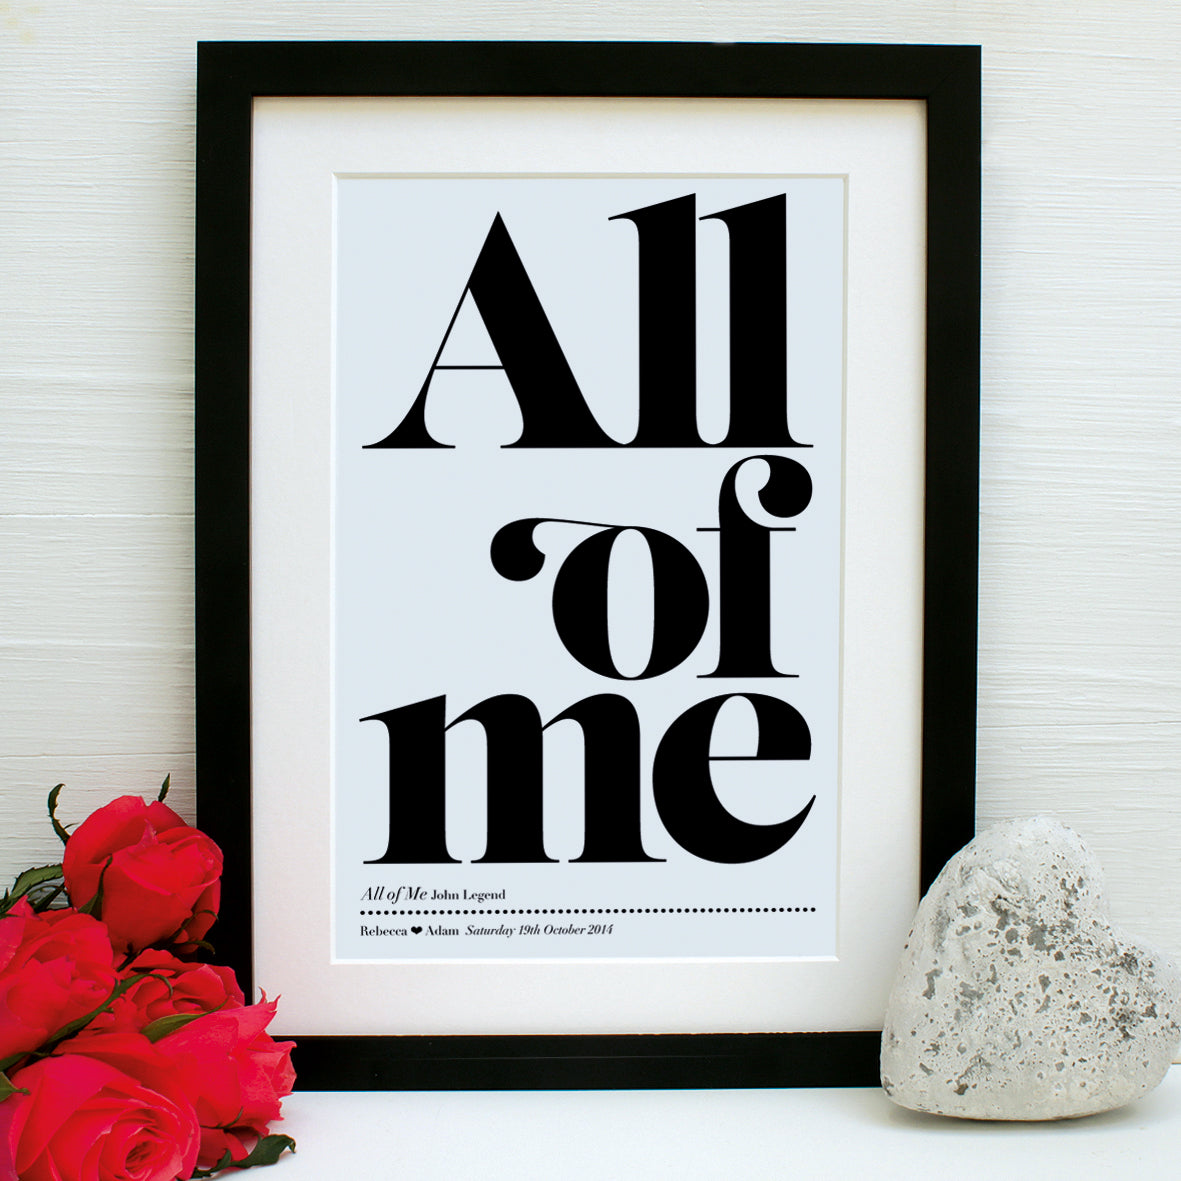 personalised favourite song print, black frame